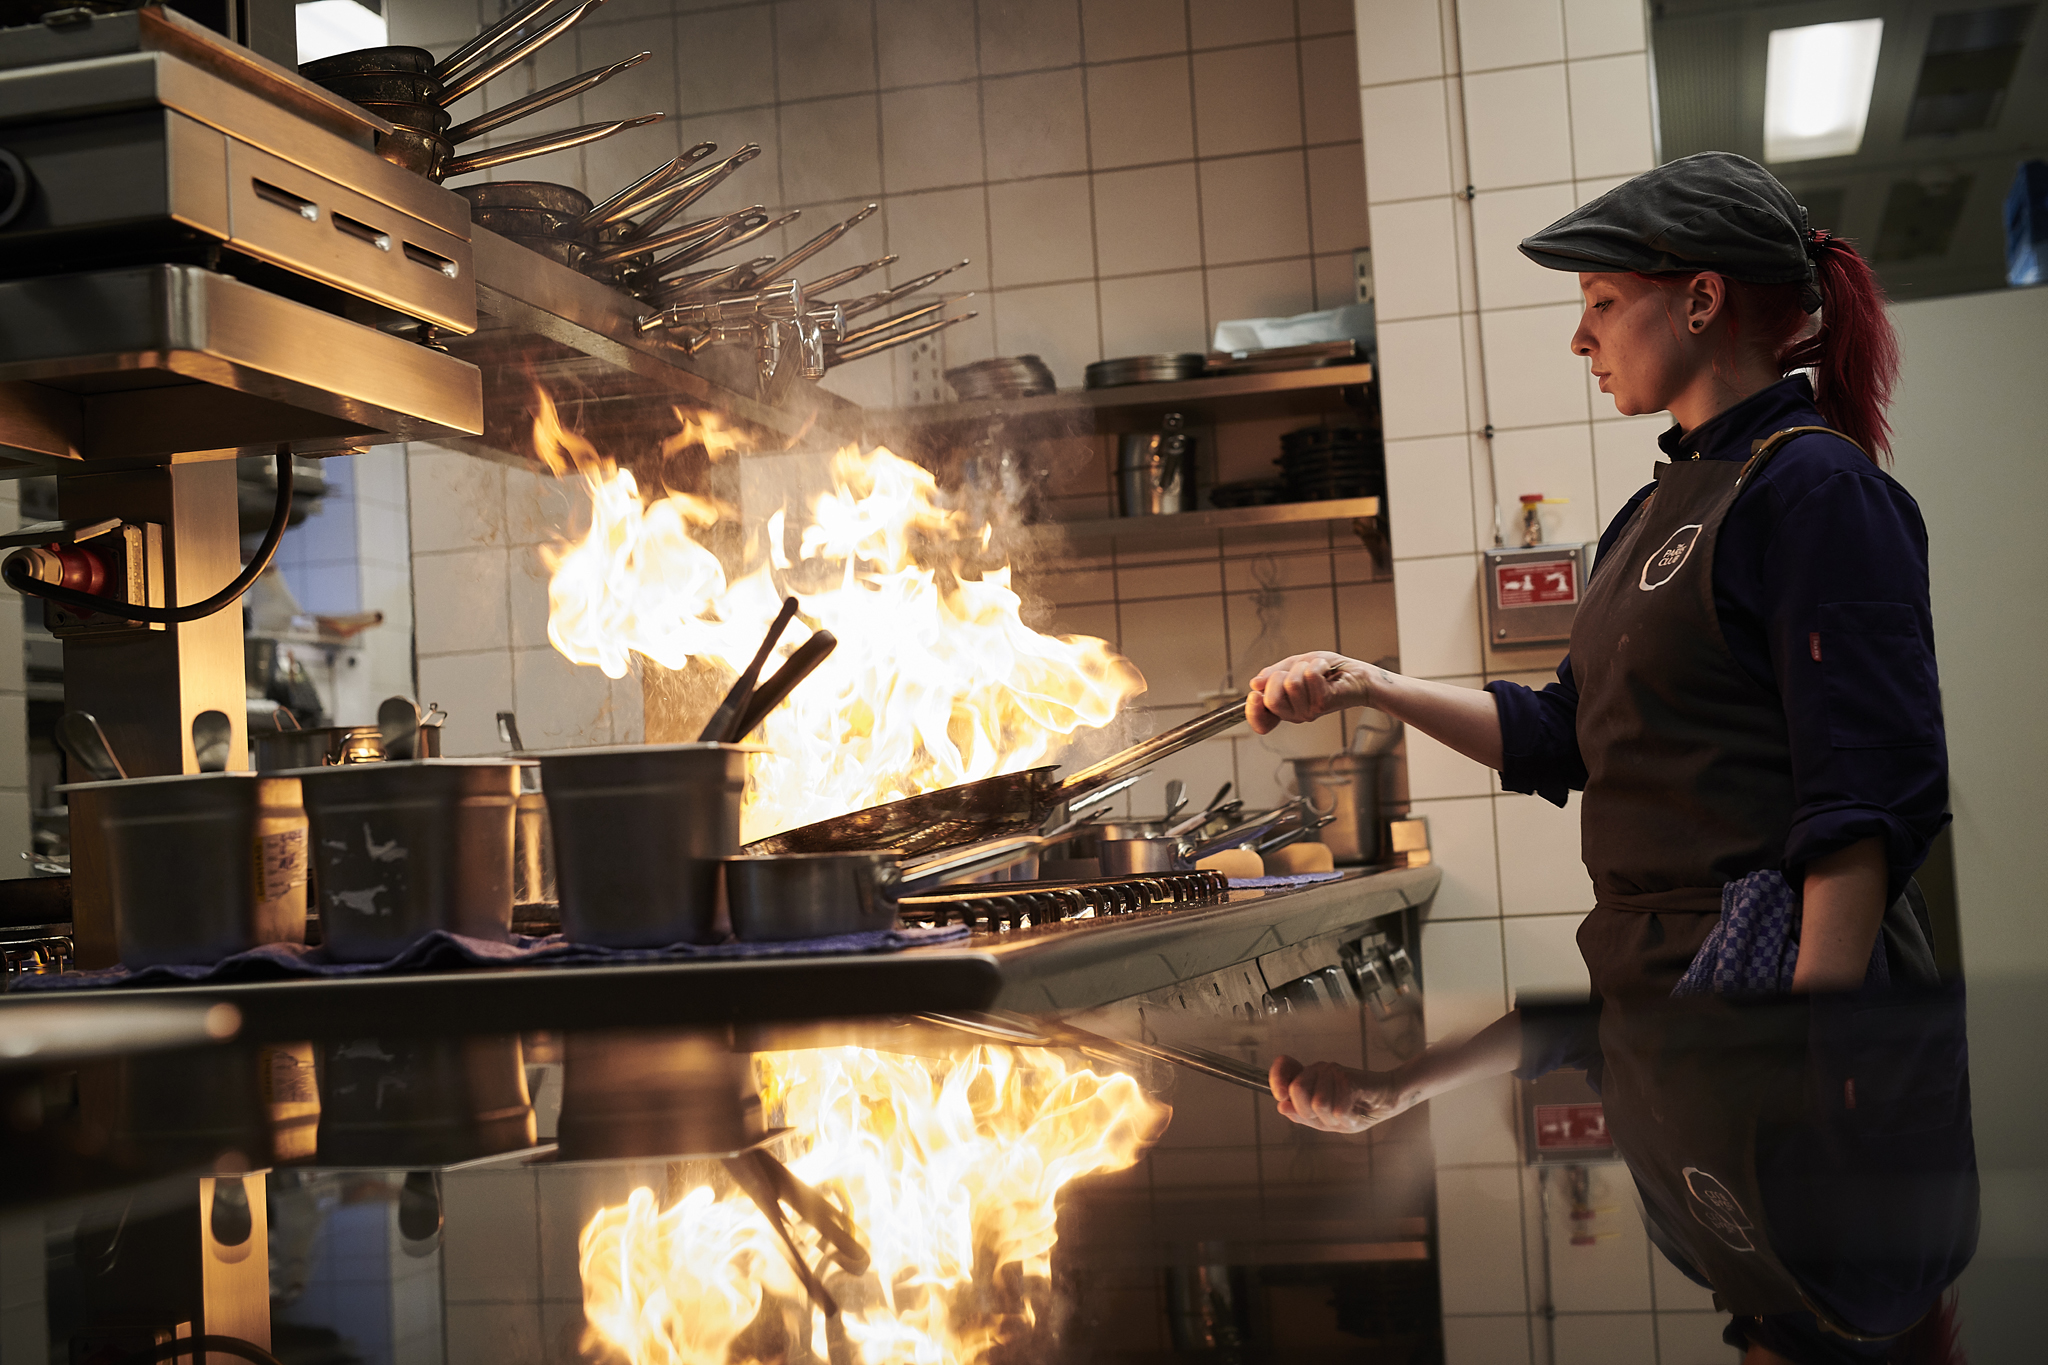 A chef flambés something in a pan on the stove, there is fire in the pan